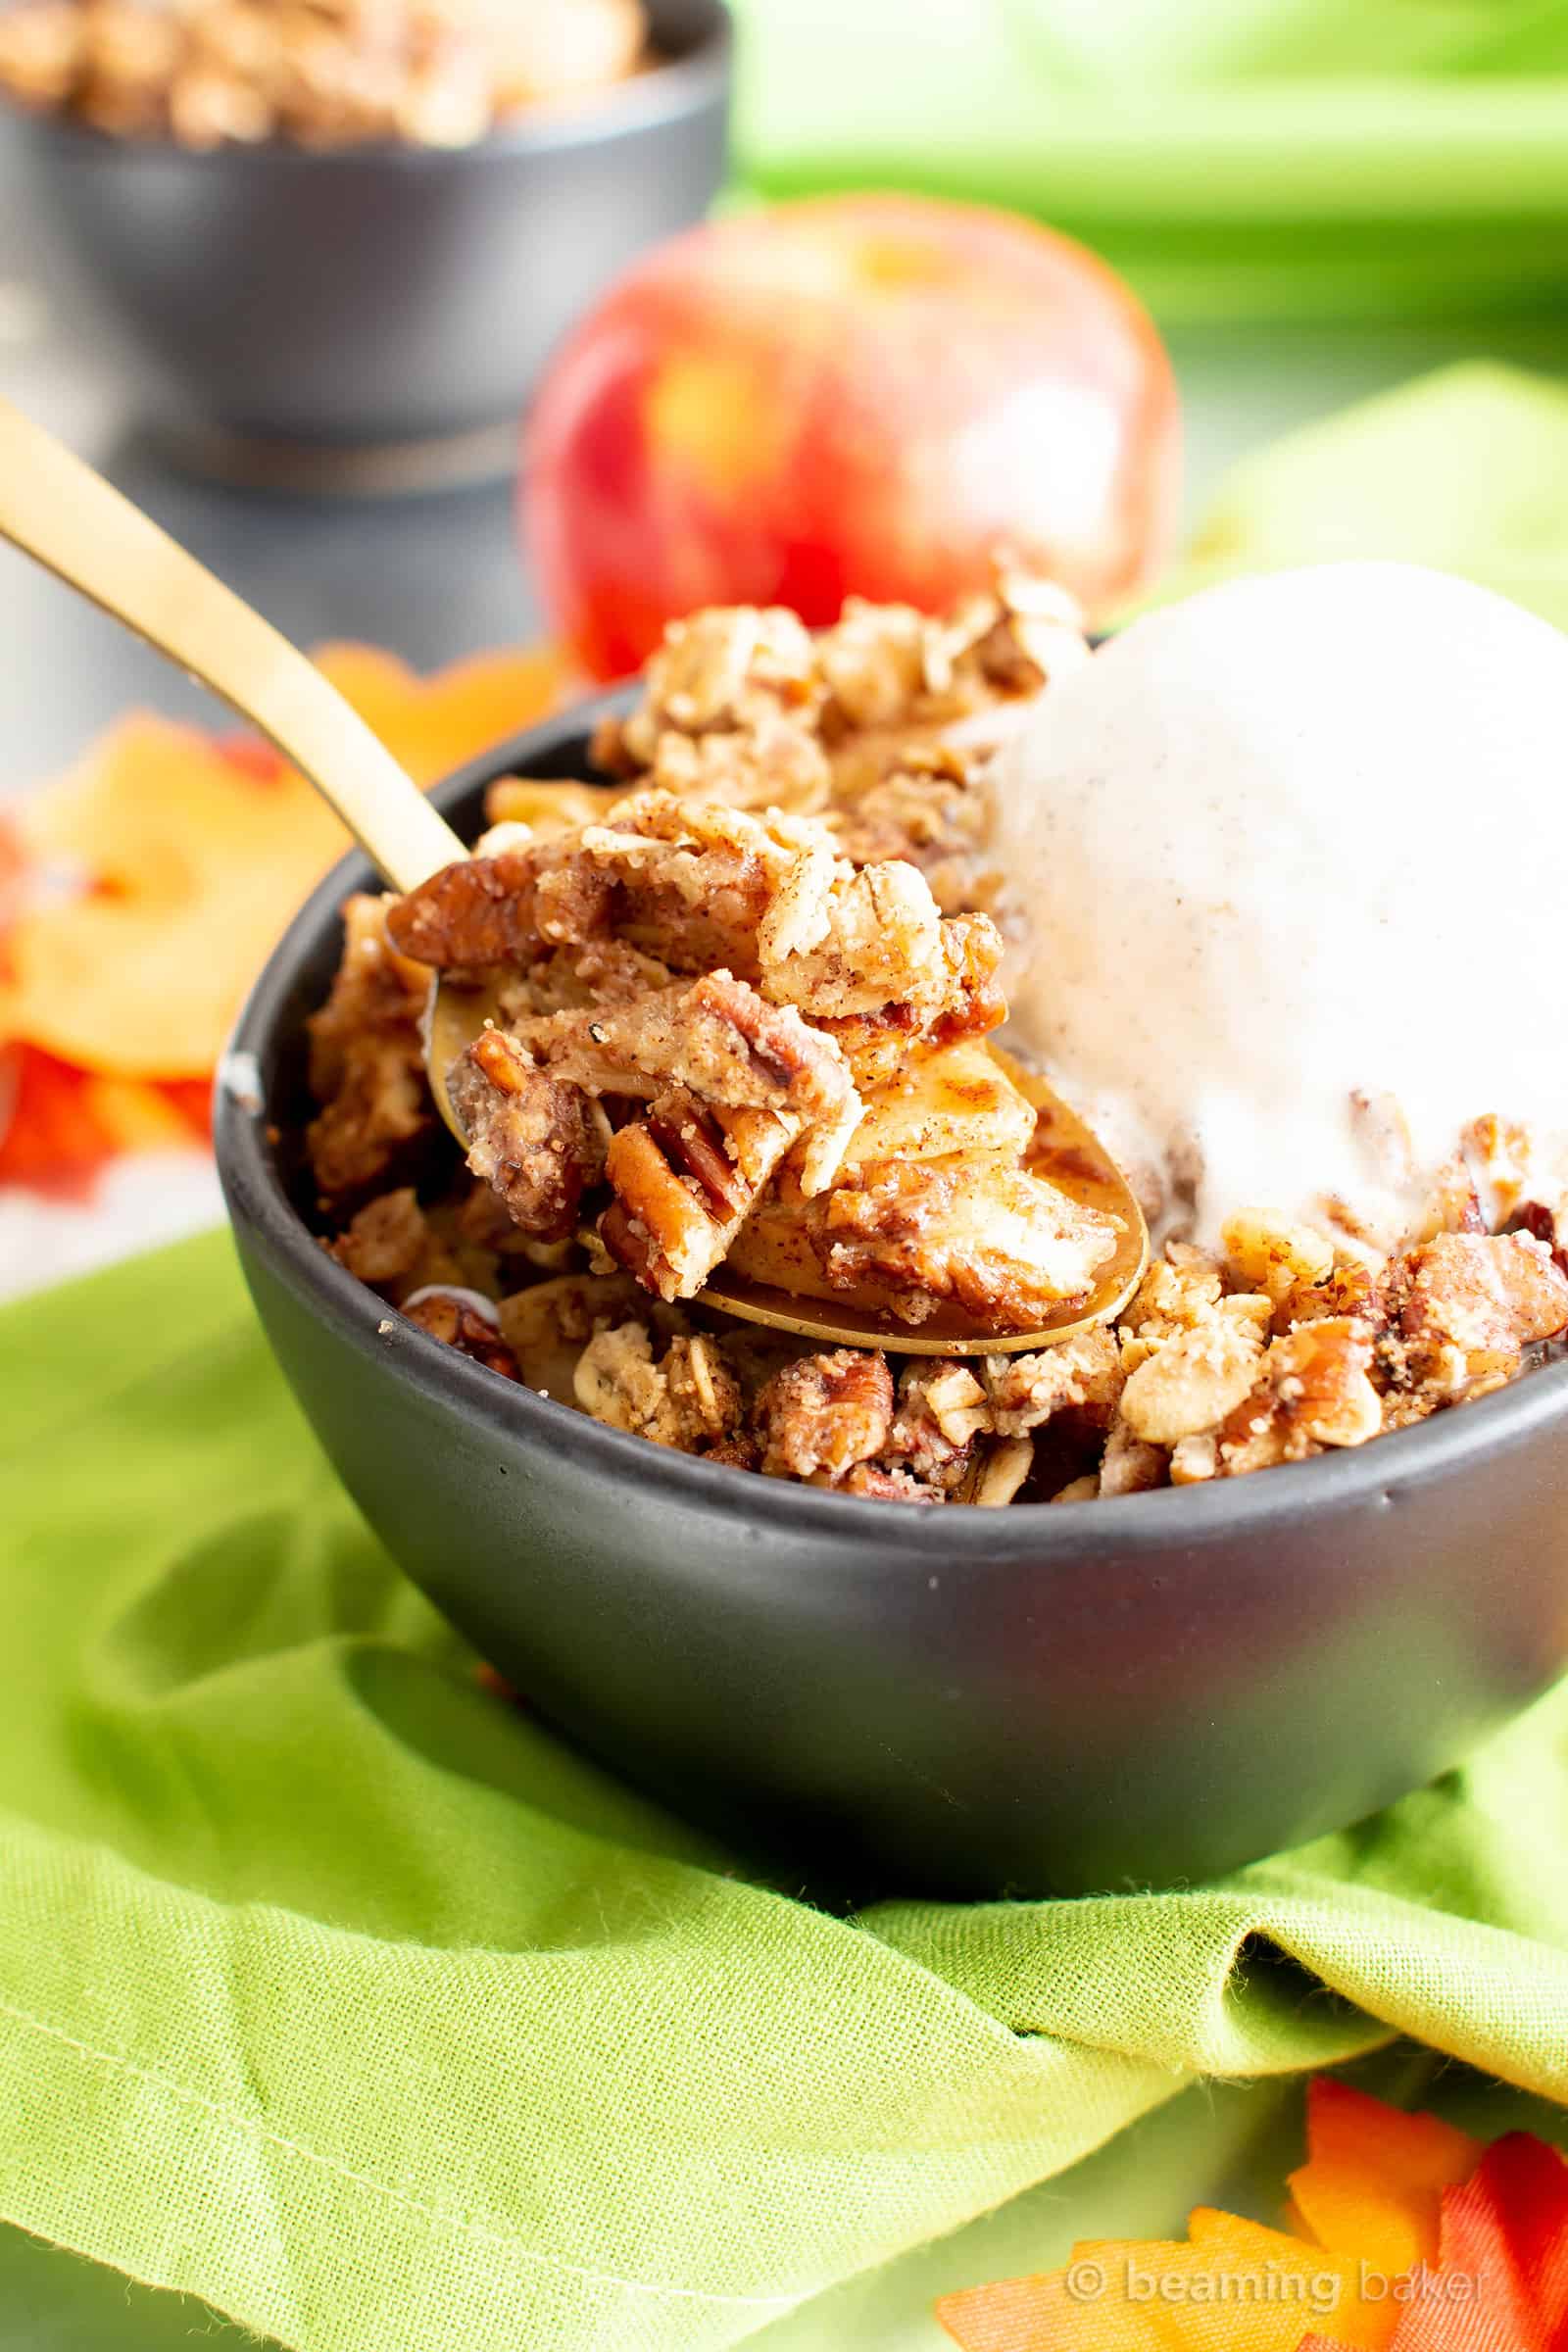 Vegan Gluten Free Cinnamon Apple Crisp with Oats (V, GF): an easy recipe for a warm, gooey apple crisp with delicious cinnamon oat topping. Made with healthy ingredients. #Vegan #GlutenFree #GlutenFreeVegan #AppleCrisp #HealthyDesserts #Fall | Recipe at BeamingBaker.com